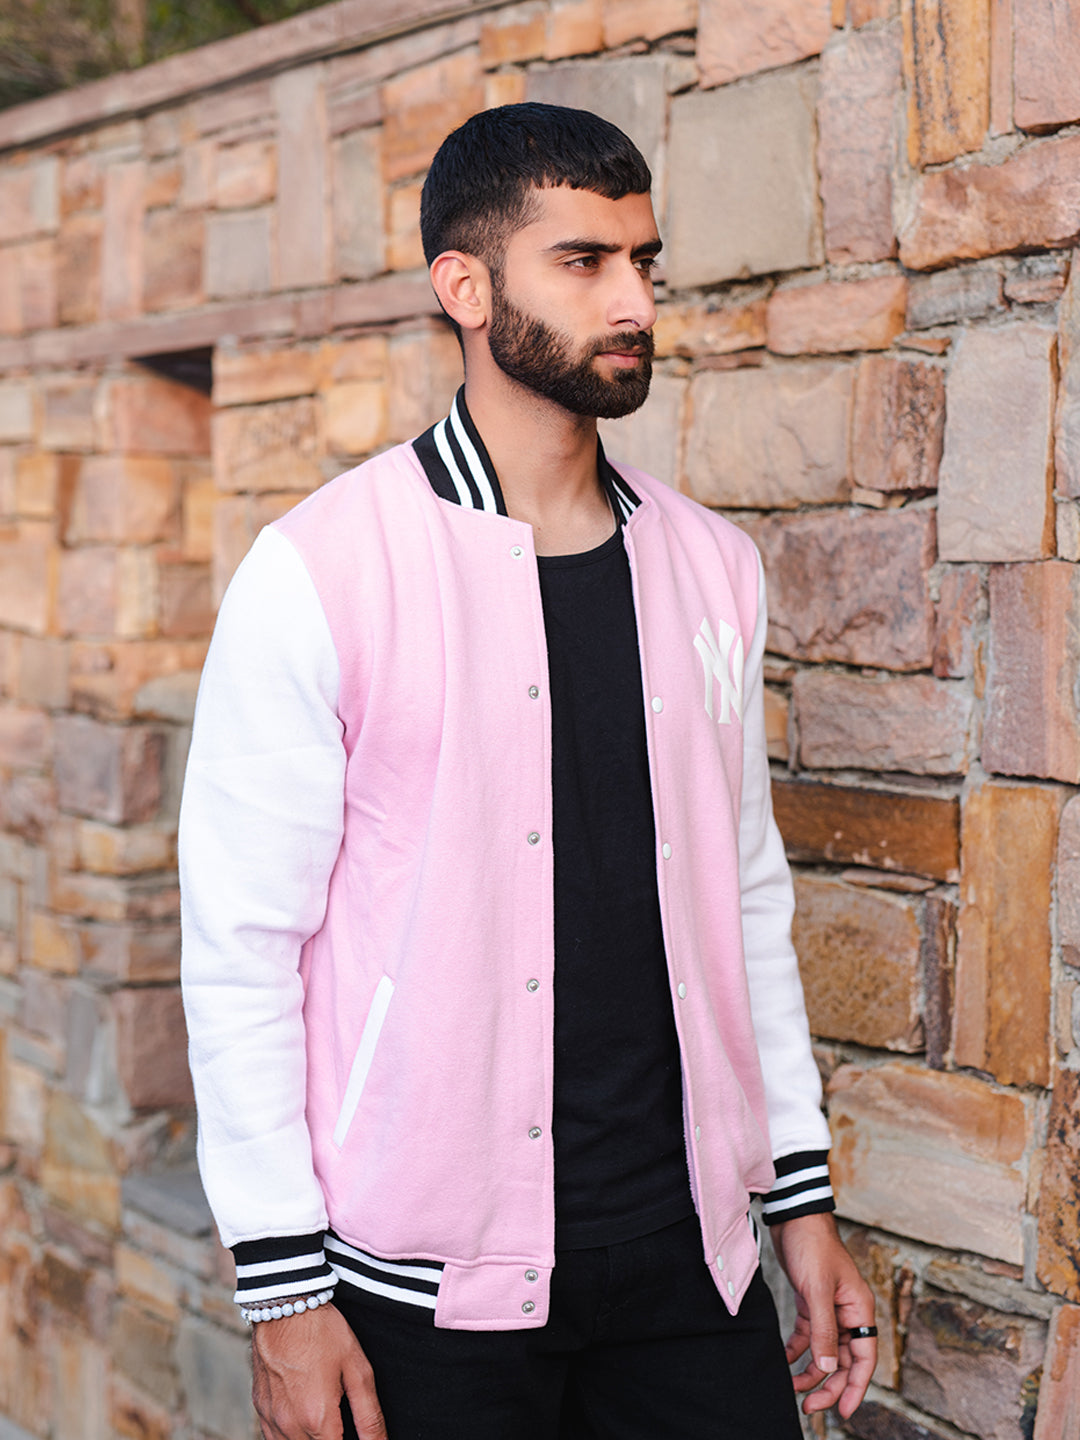 Men Pastel Outfits-23 Ways to Wear Pastel Outfits for Guys | Pink denim  jacket, Jackets fashion casual, Mens outfits